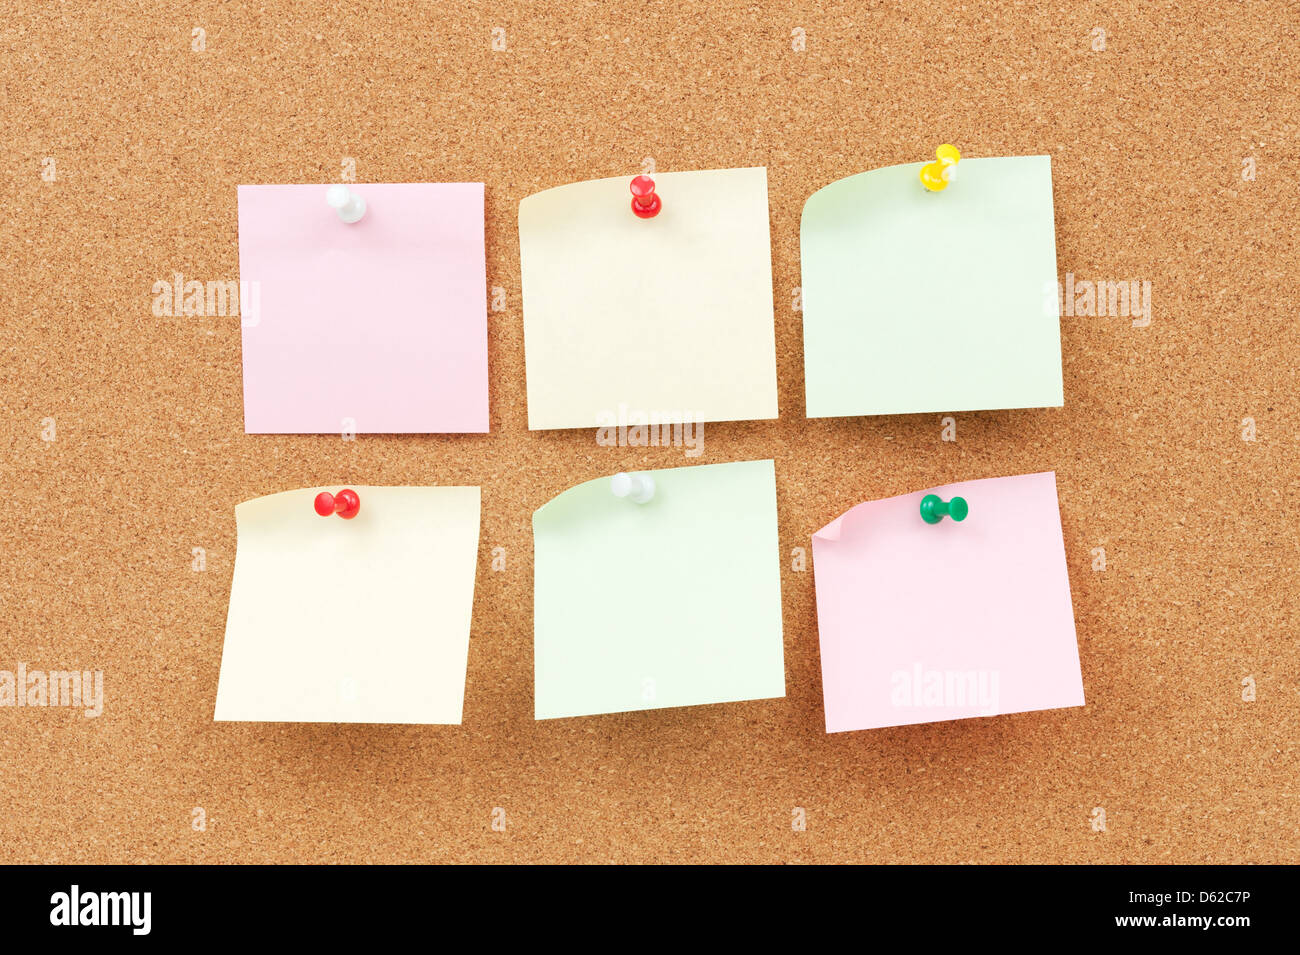 Group of thumbtack and note paper on corkboard Stock Photo